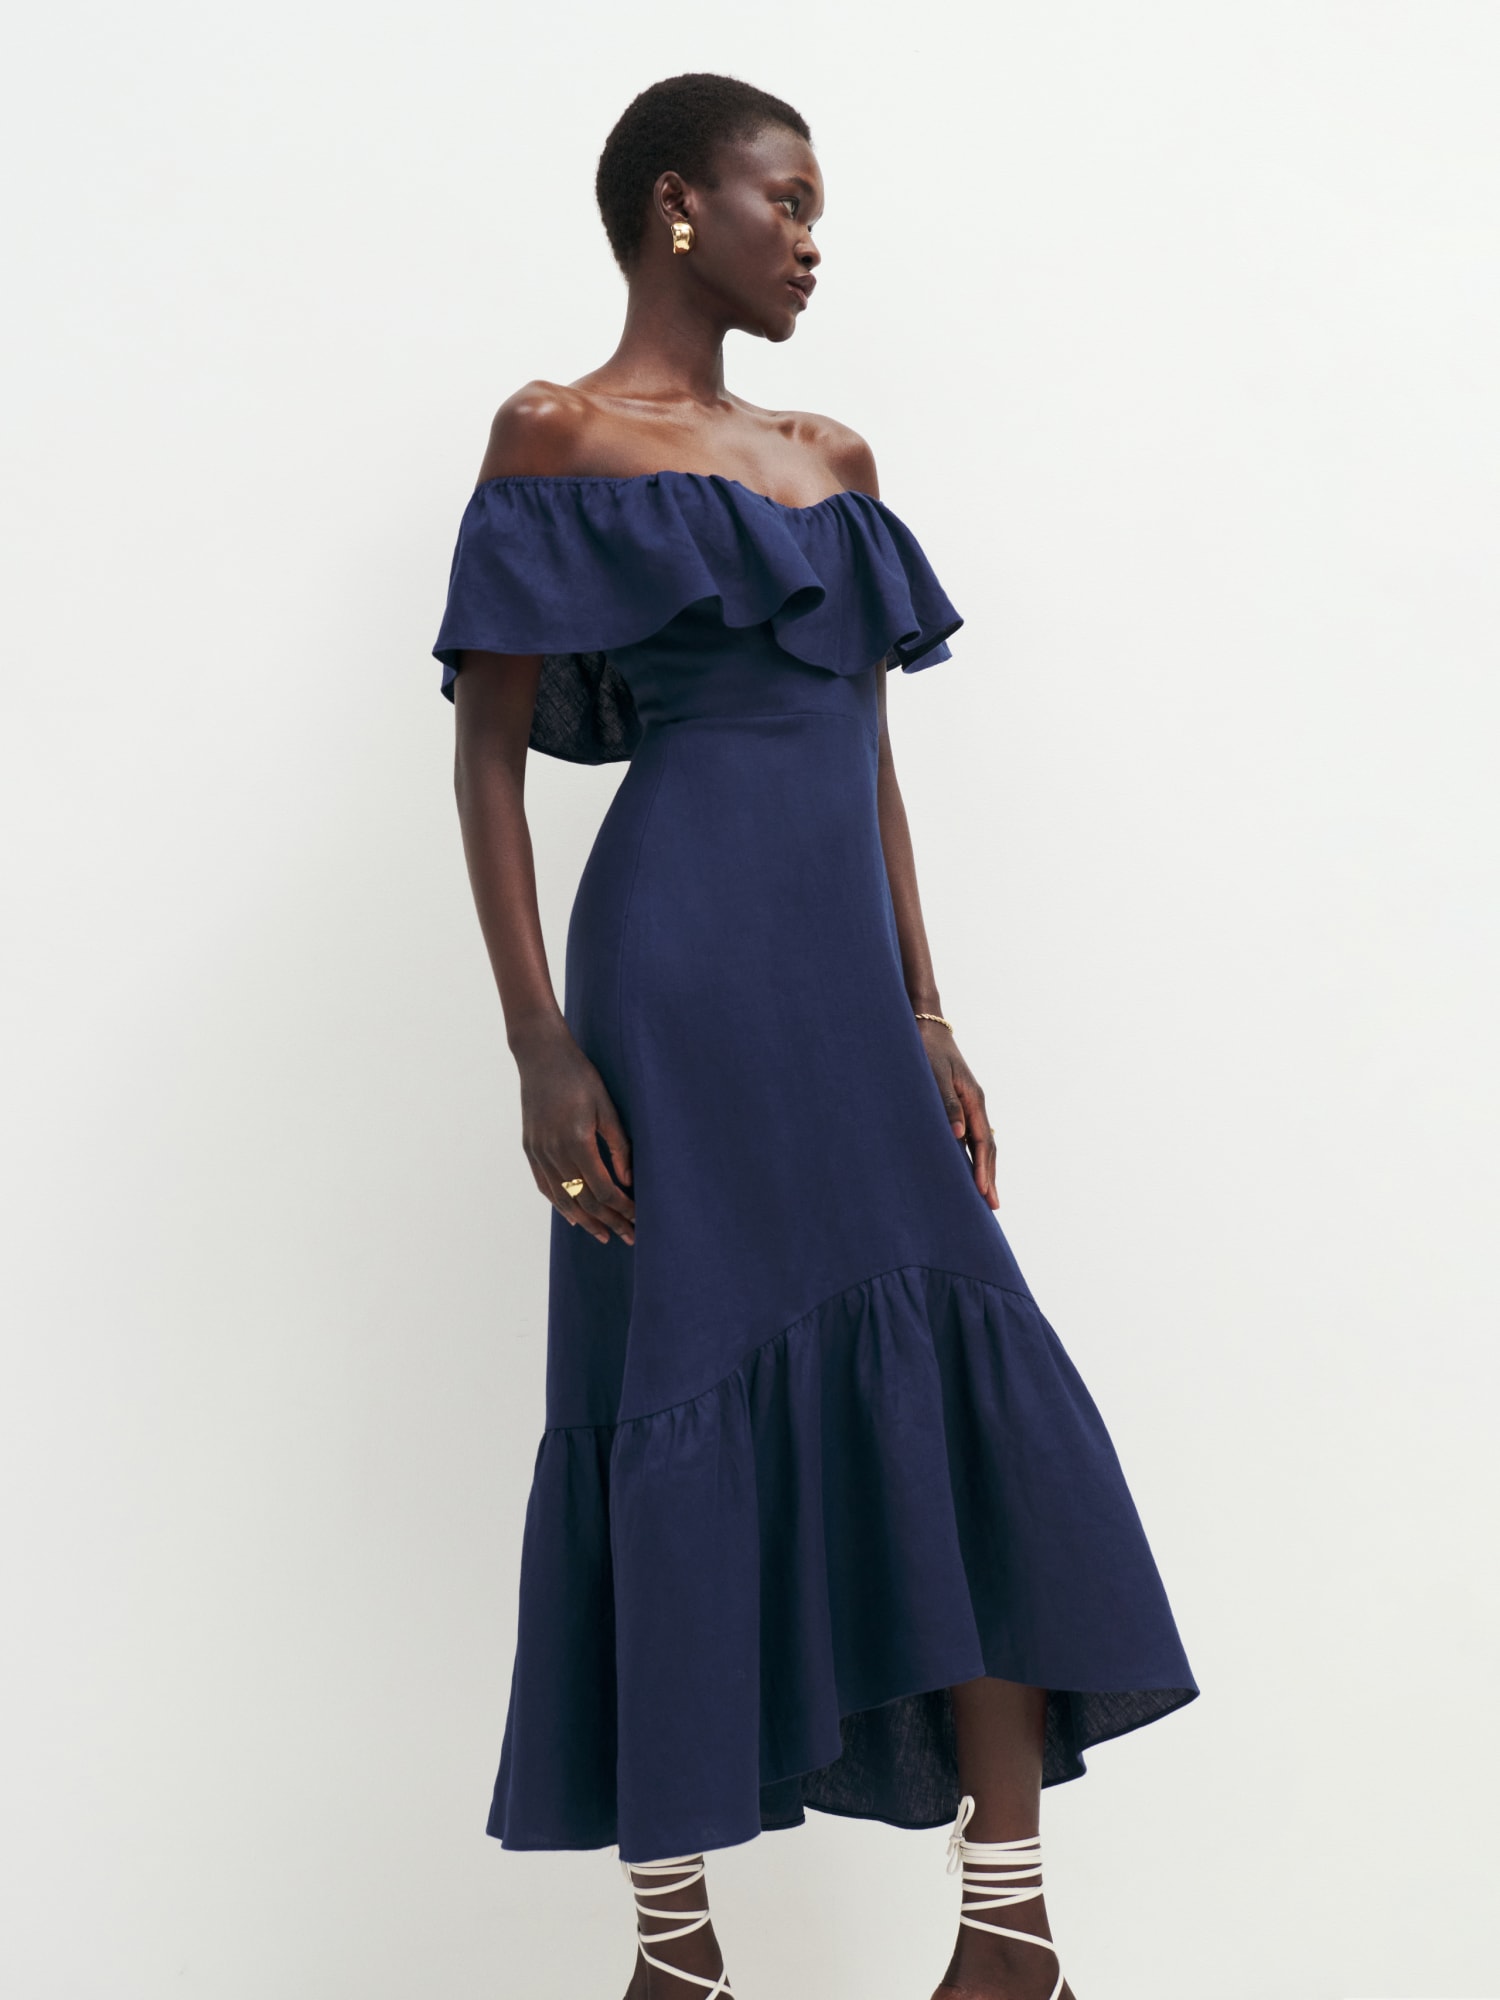 7 Dreamy Wedding Guest Dresses From Reformation: Try-On - The Mom Edit